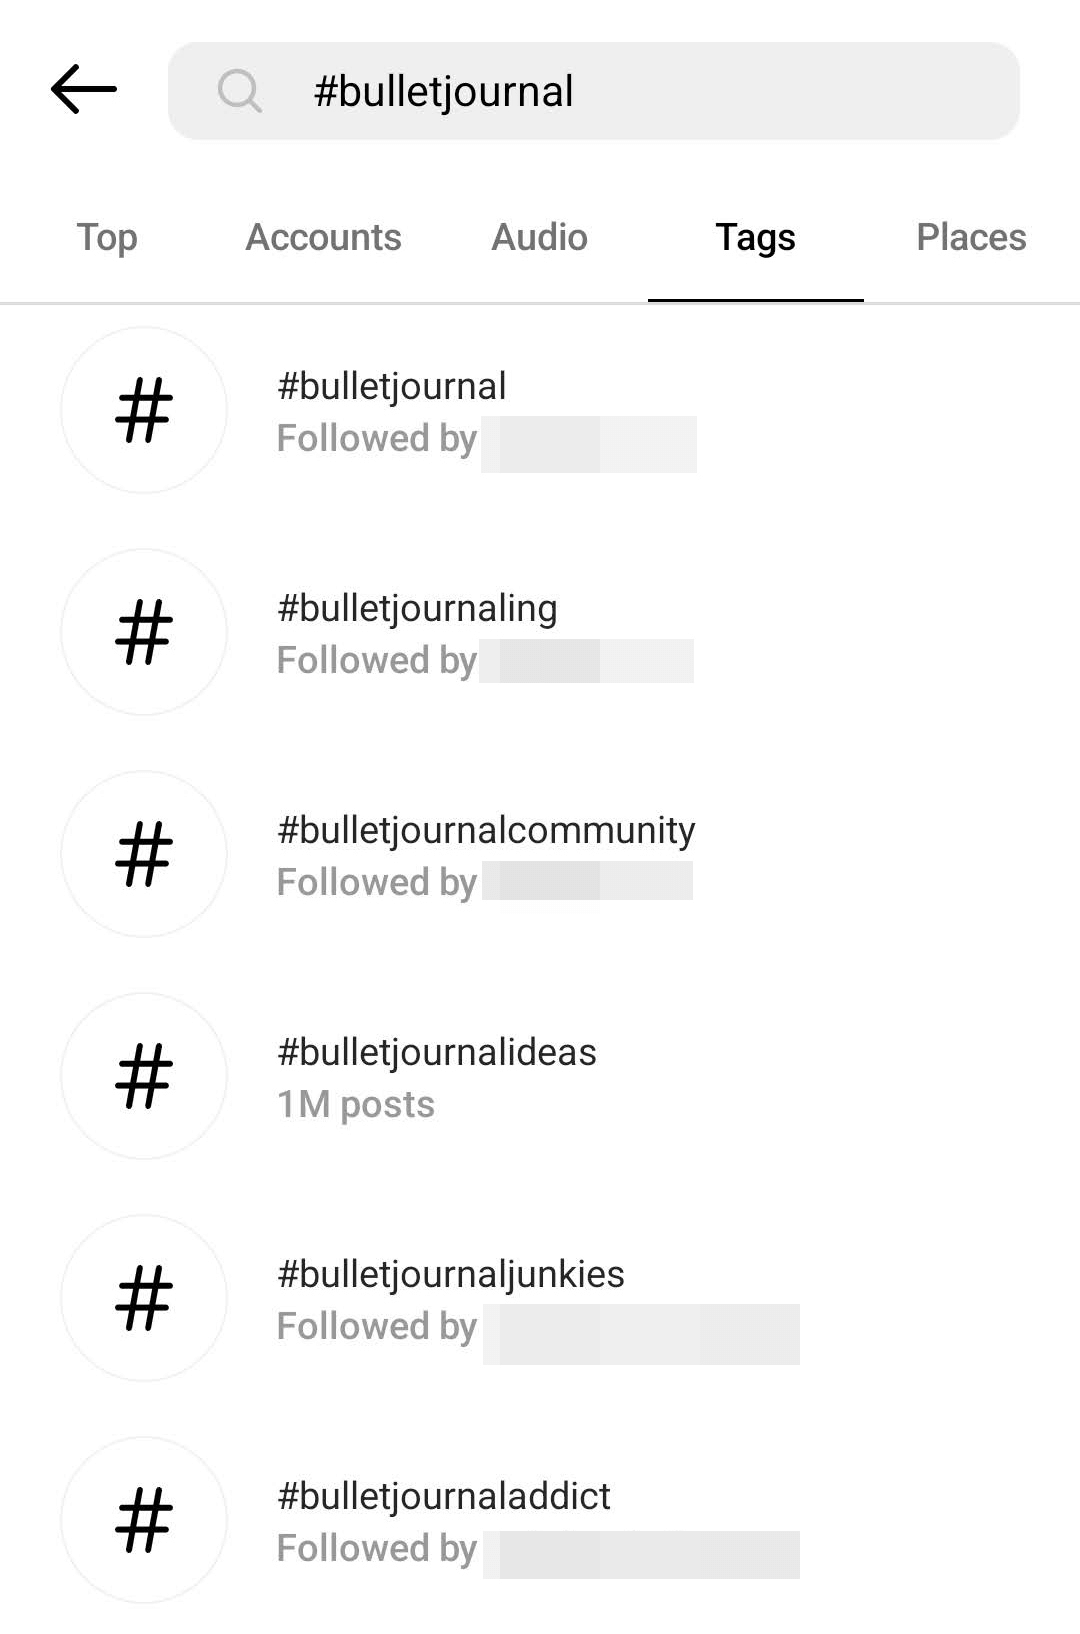 image of Instagram hashtag search